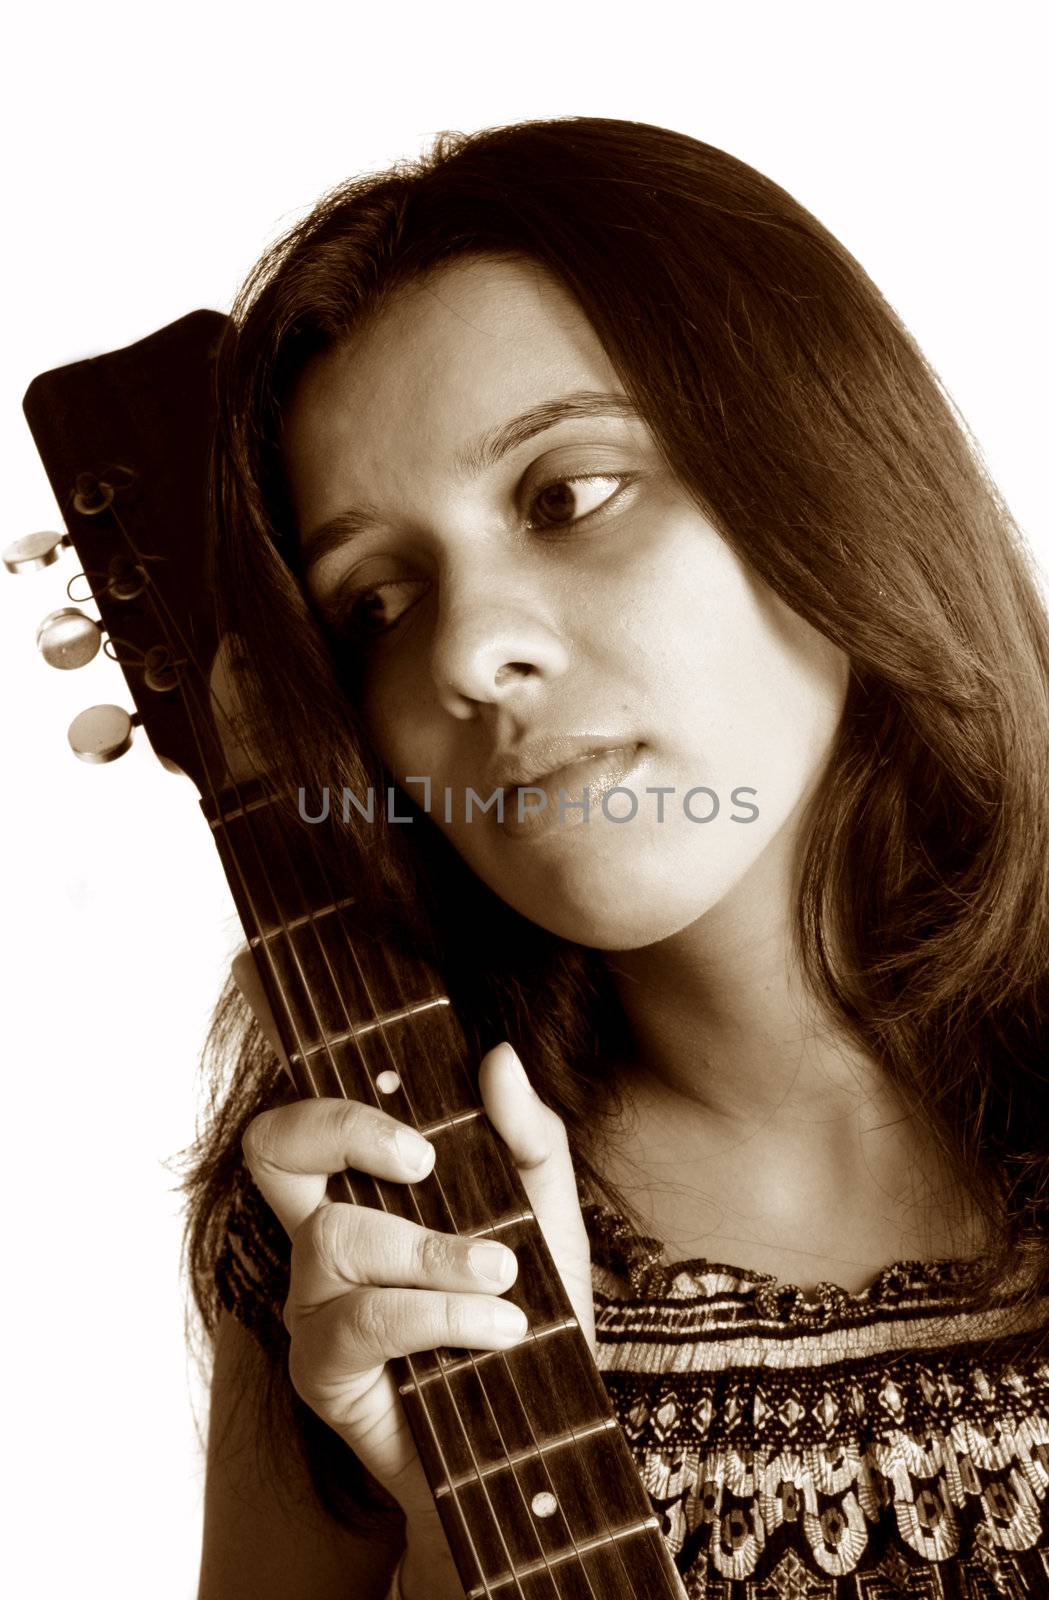 A portrait of a beautiful indian guitarist lost in her dreams.